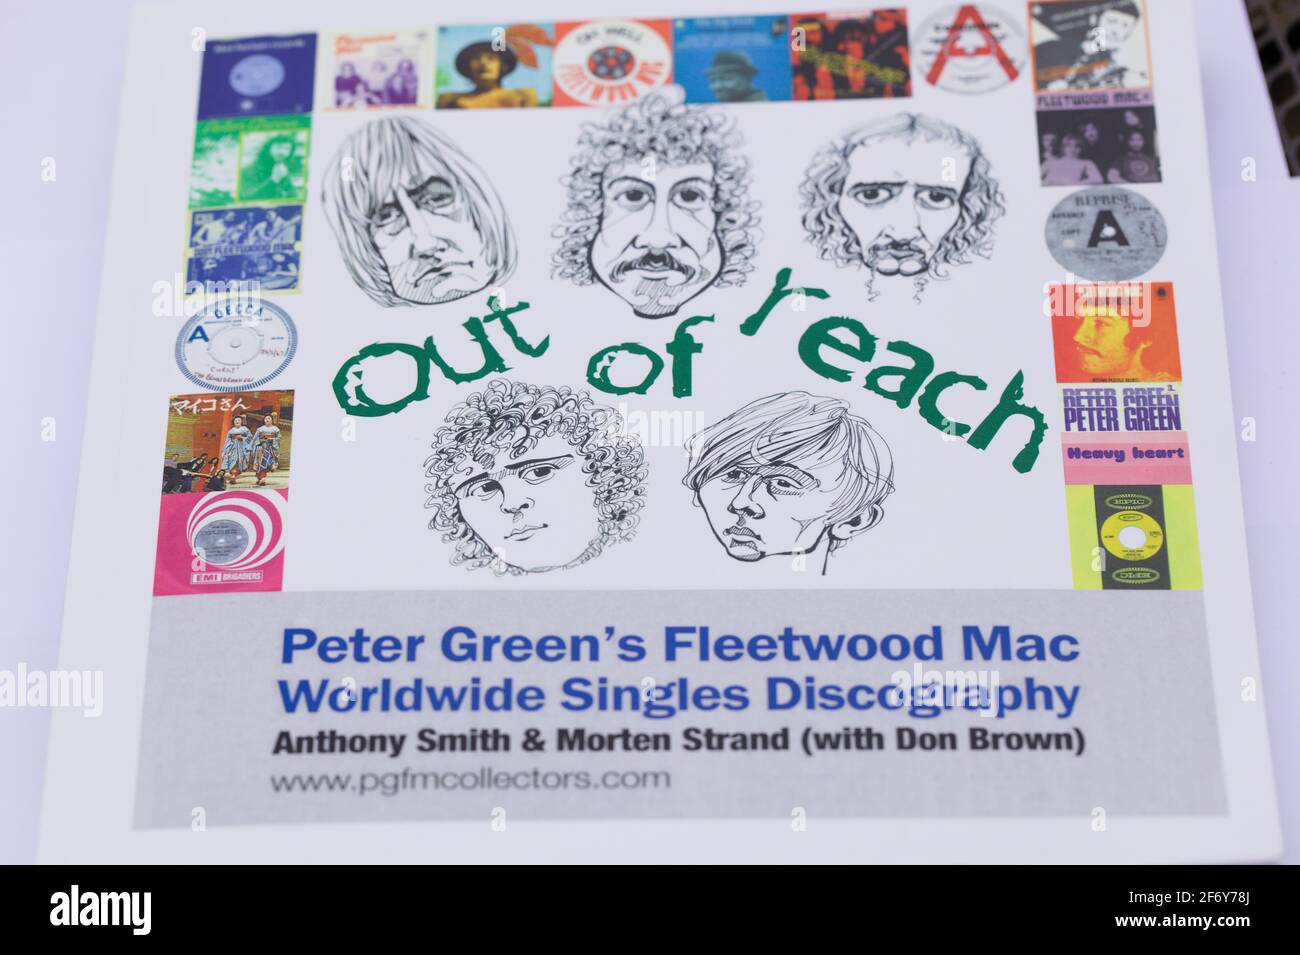 View of Out of Reach, Peter Green's Fleetwood Mac Worldwide Singles Discography book by Anthony Smith, Morten Strand on a white background Stock Photo